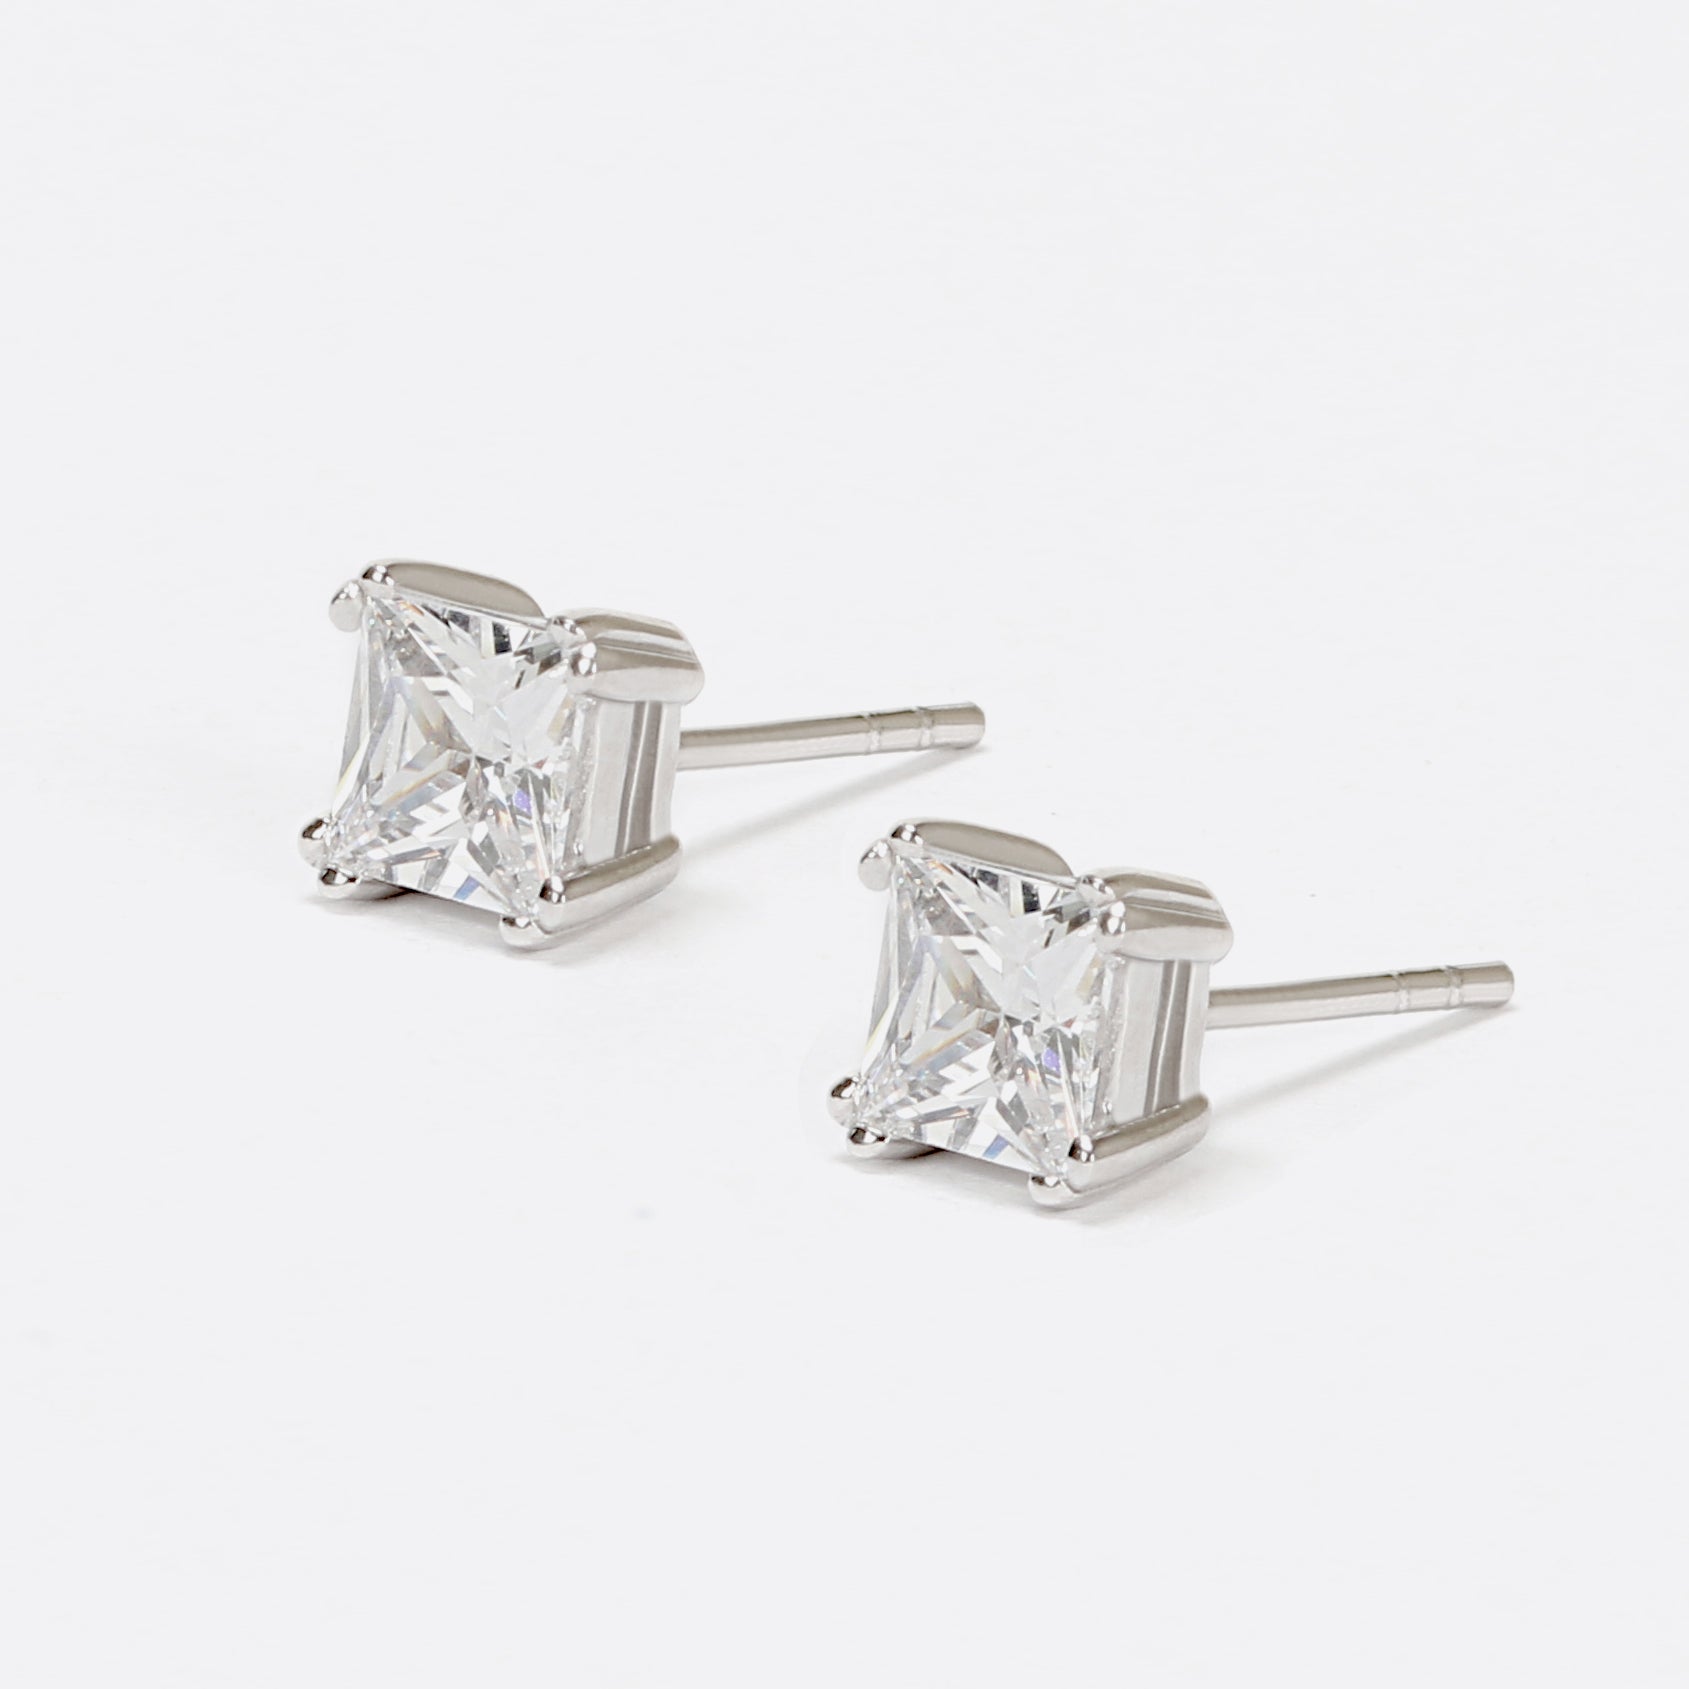 Sterling silver earrings with square cubic zirconia